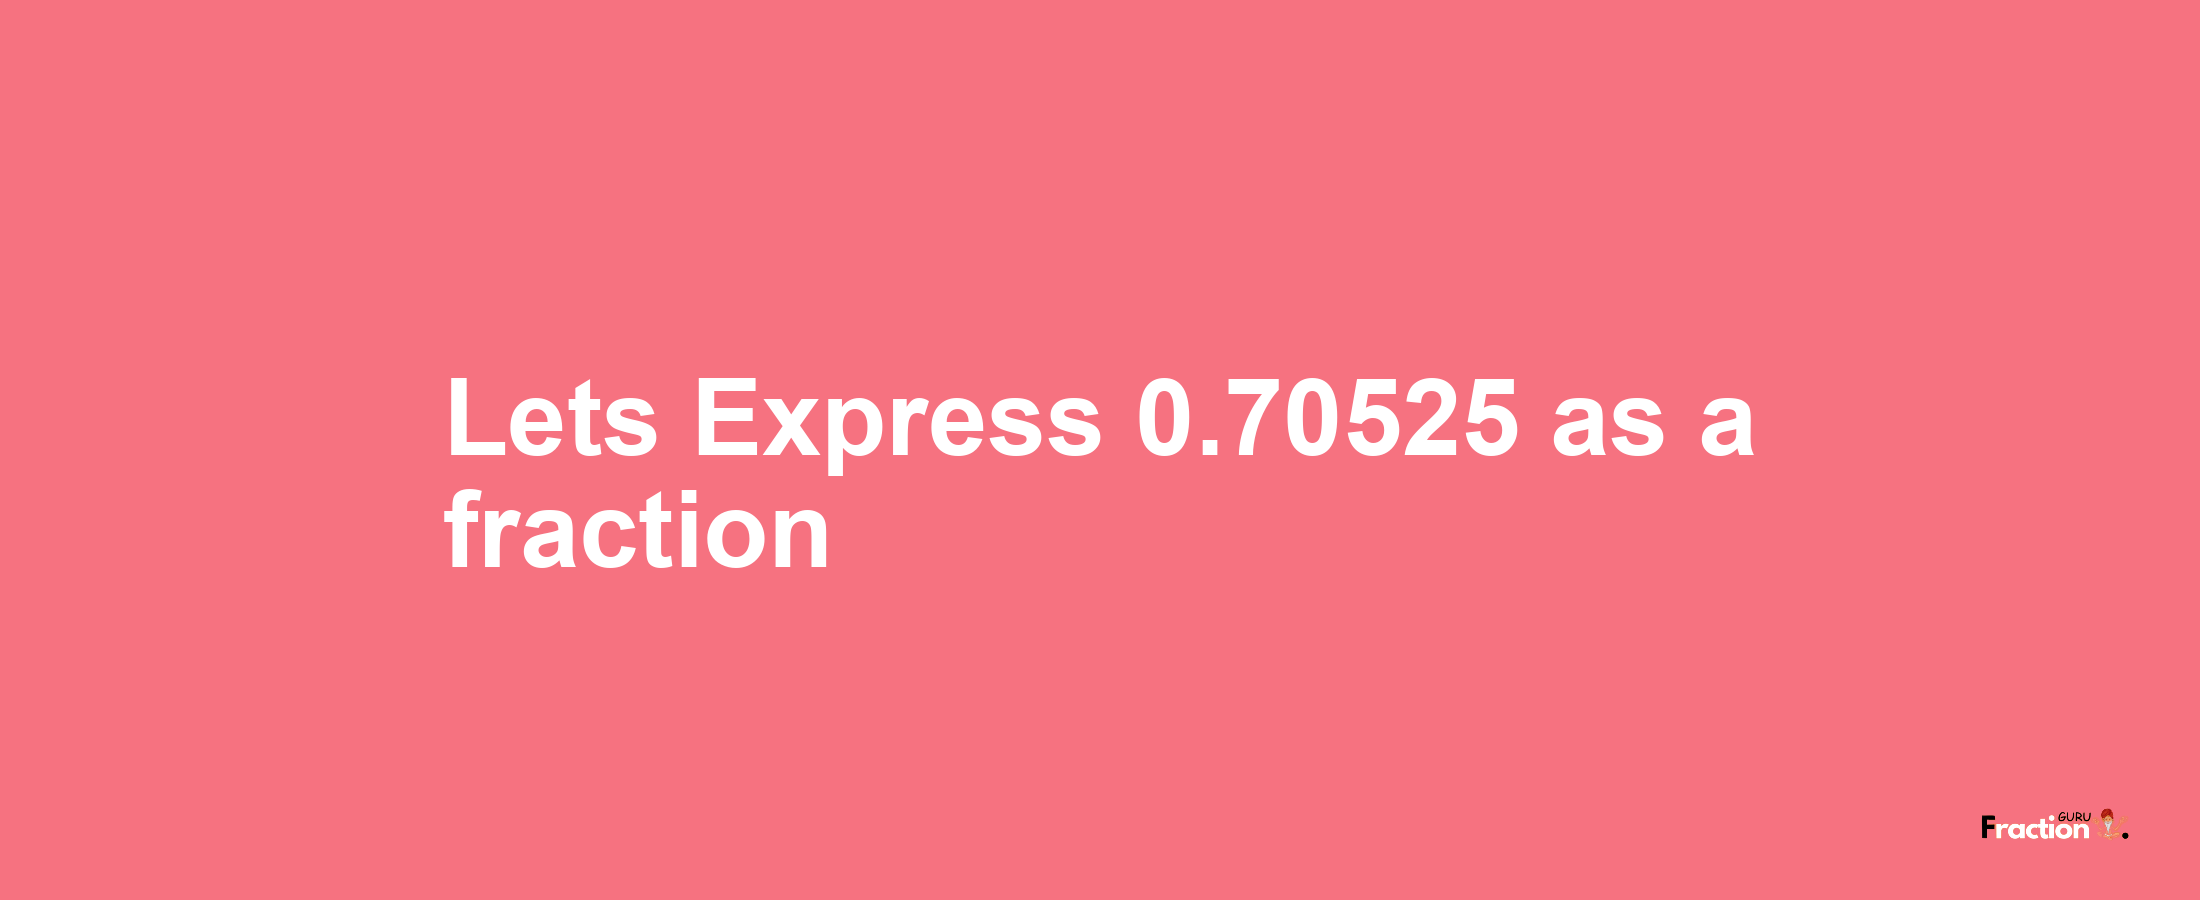 Lets Express 0.70525 as afraction